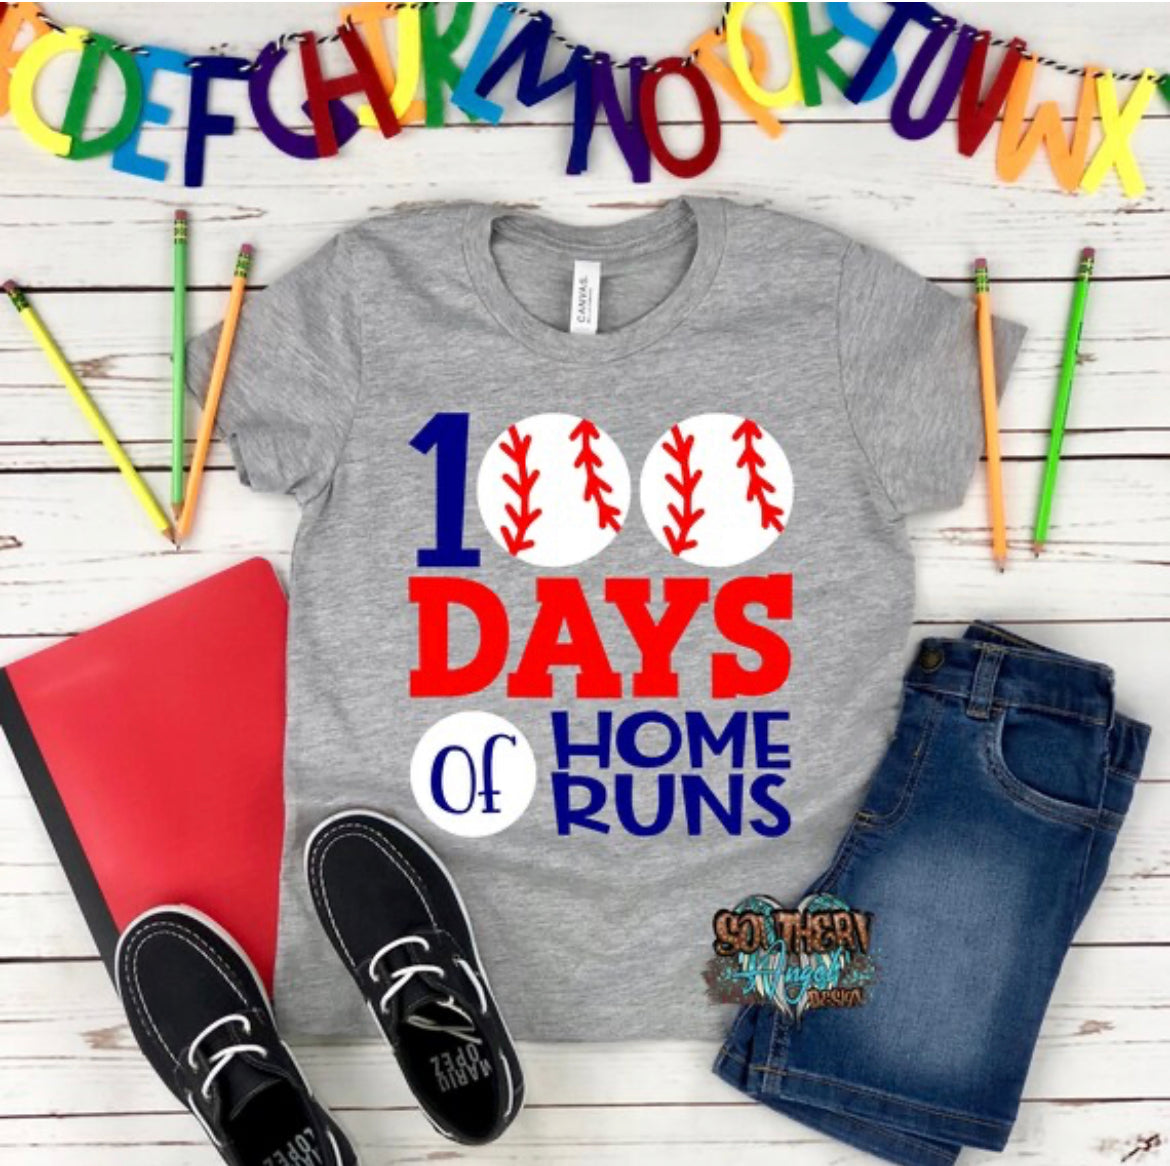 Gray 100 Days Of Home Runs image_aced07ba-f5f7-4862-afd0-d85a513dddb3.jpg 100-days-of-home-runs 100 Days Of School